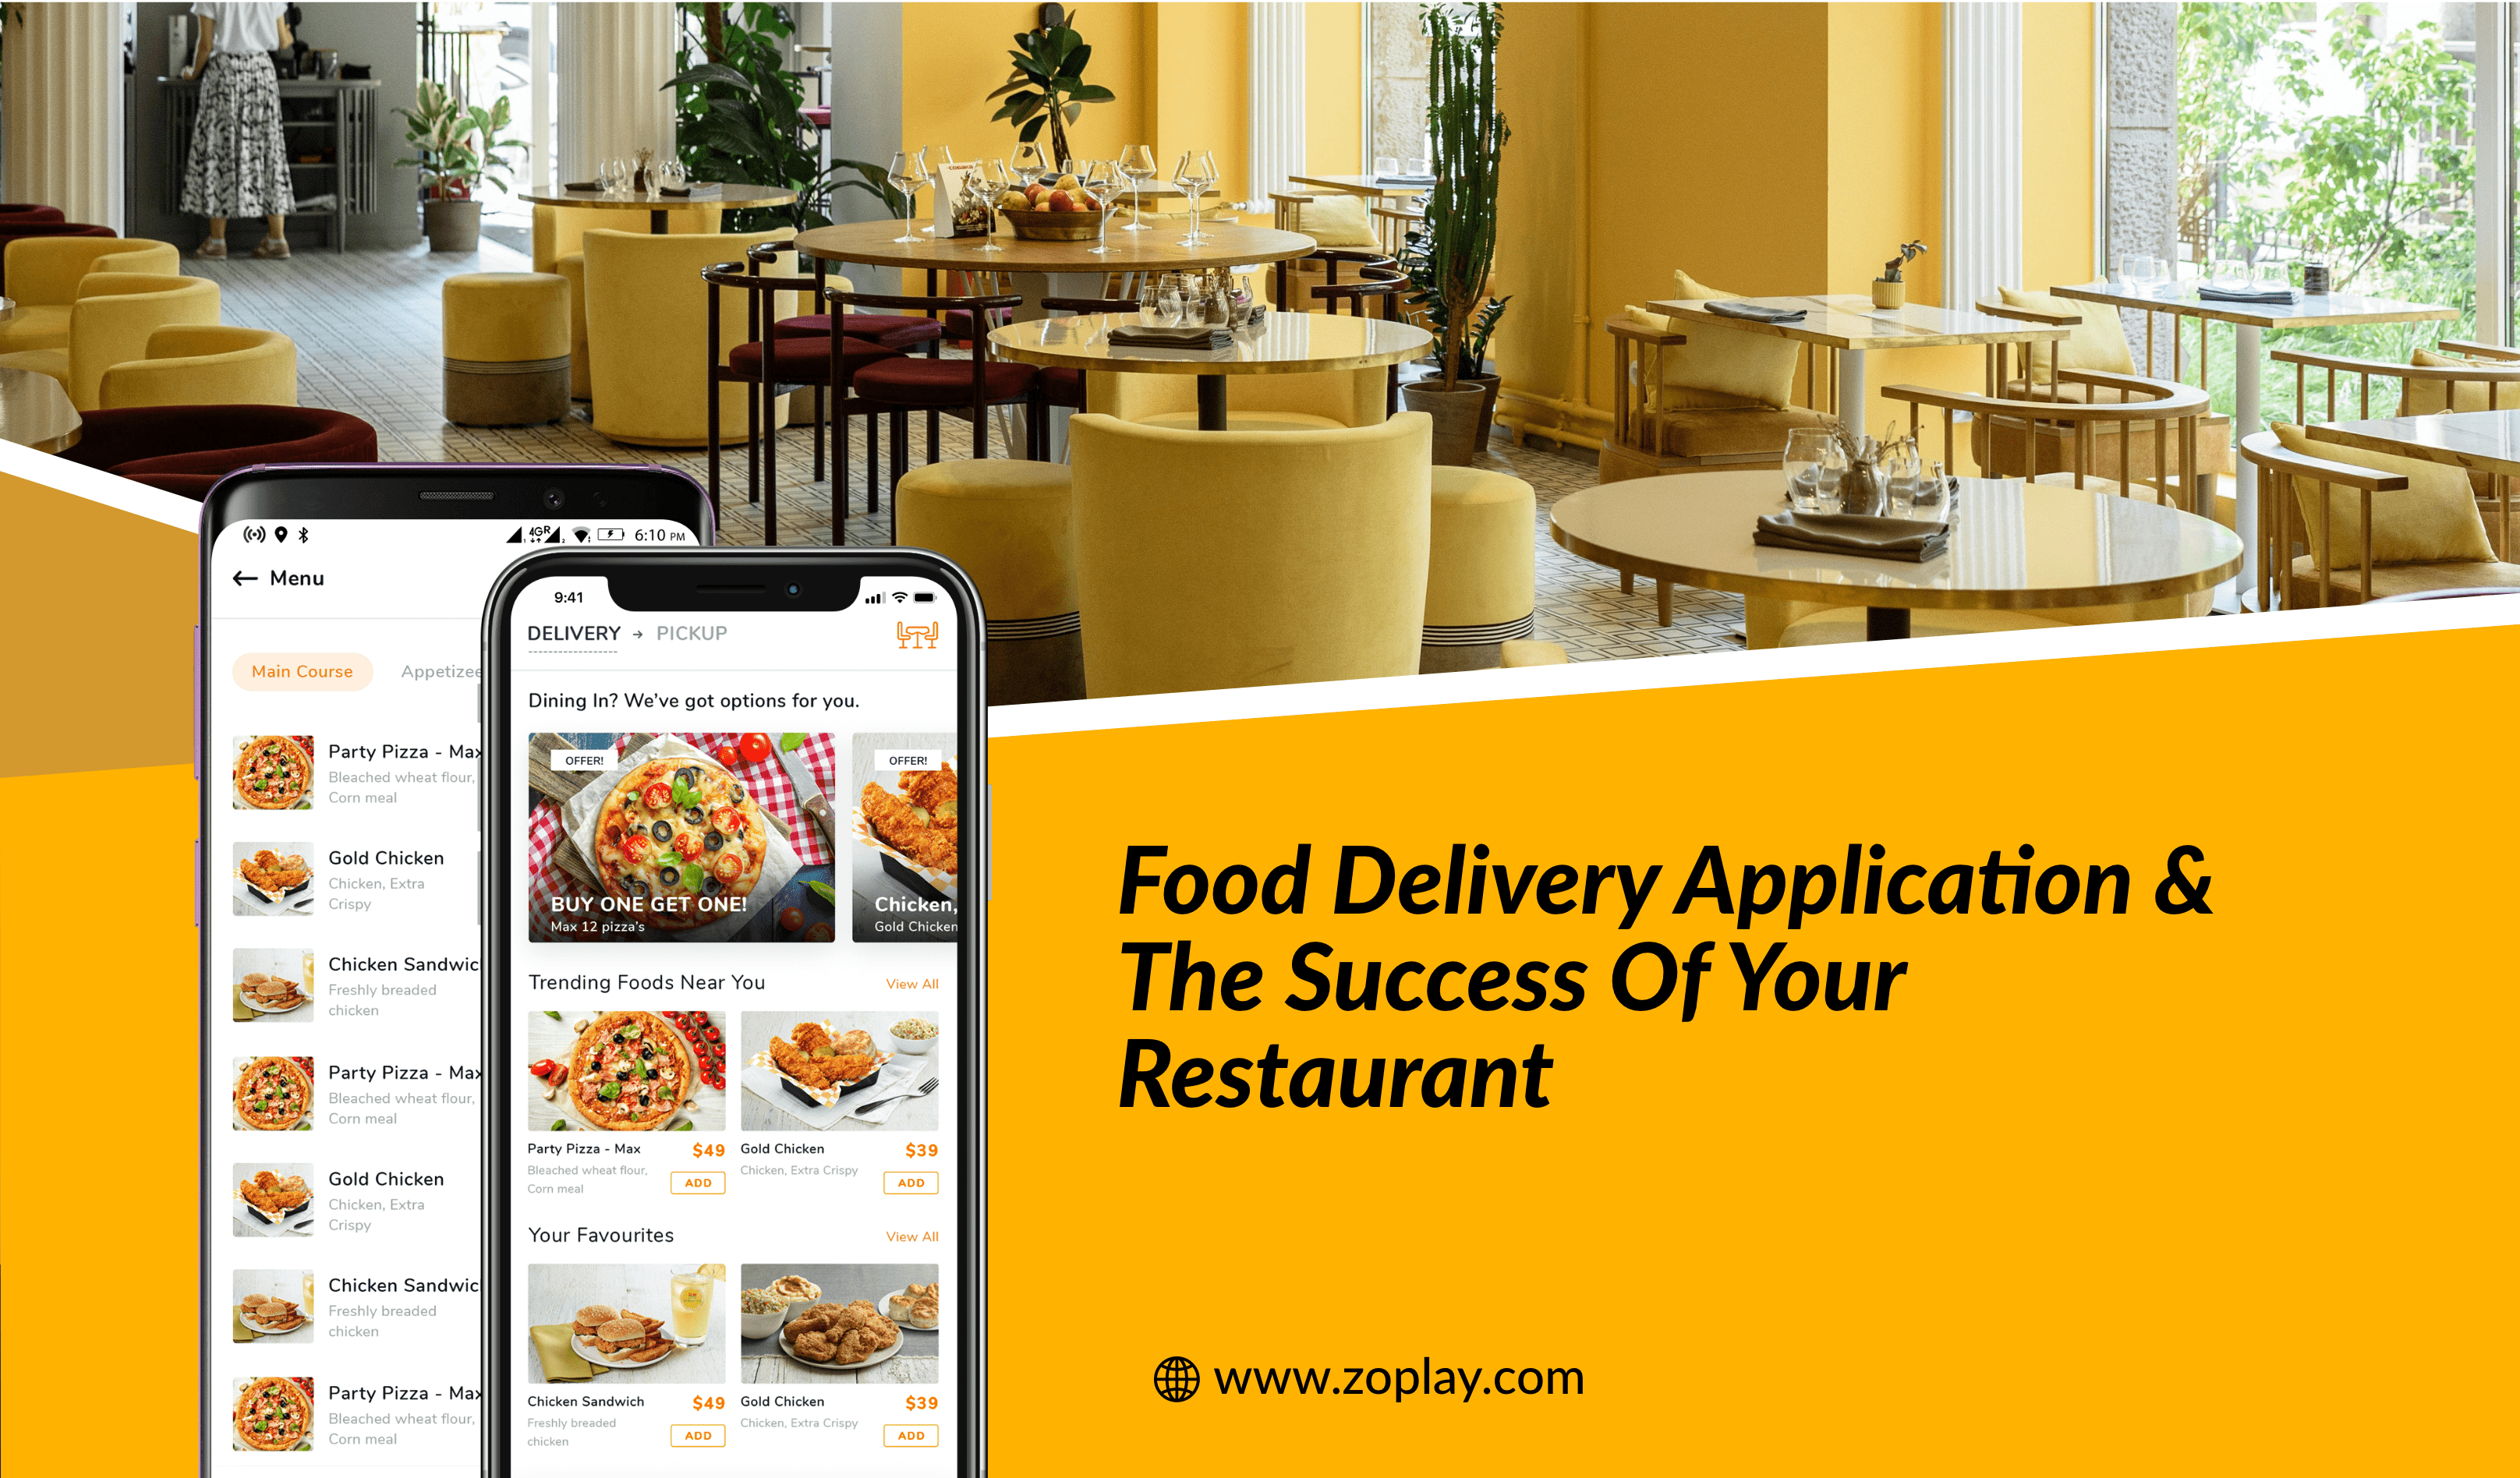 Food Delivery Application & the Success Of Your Restaurant